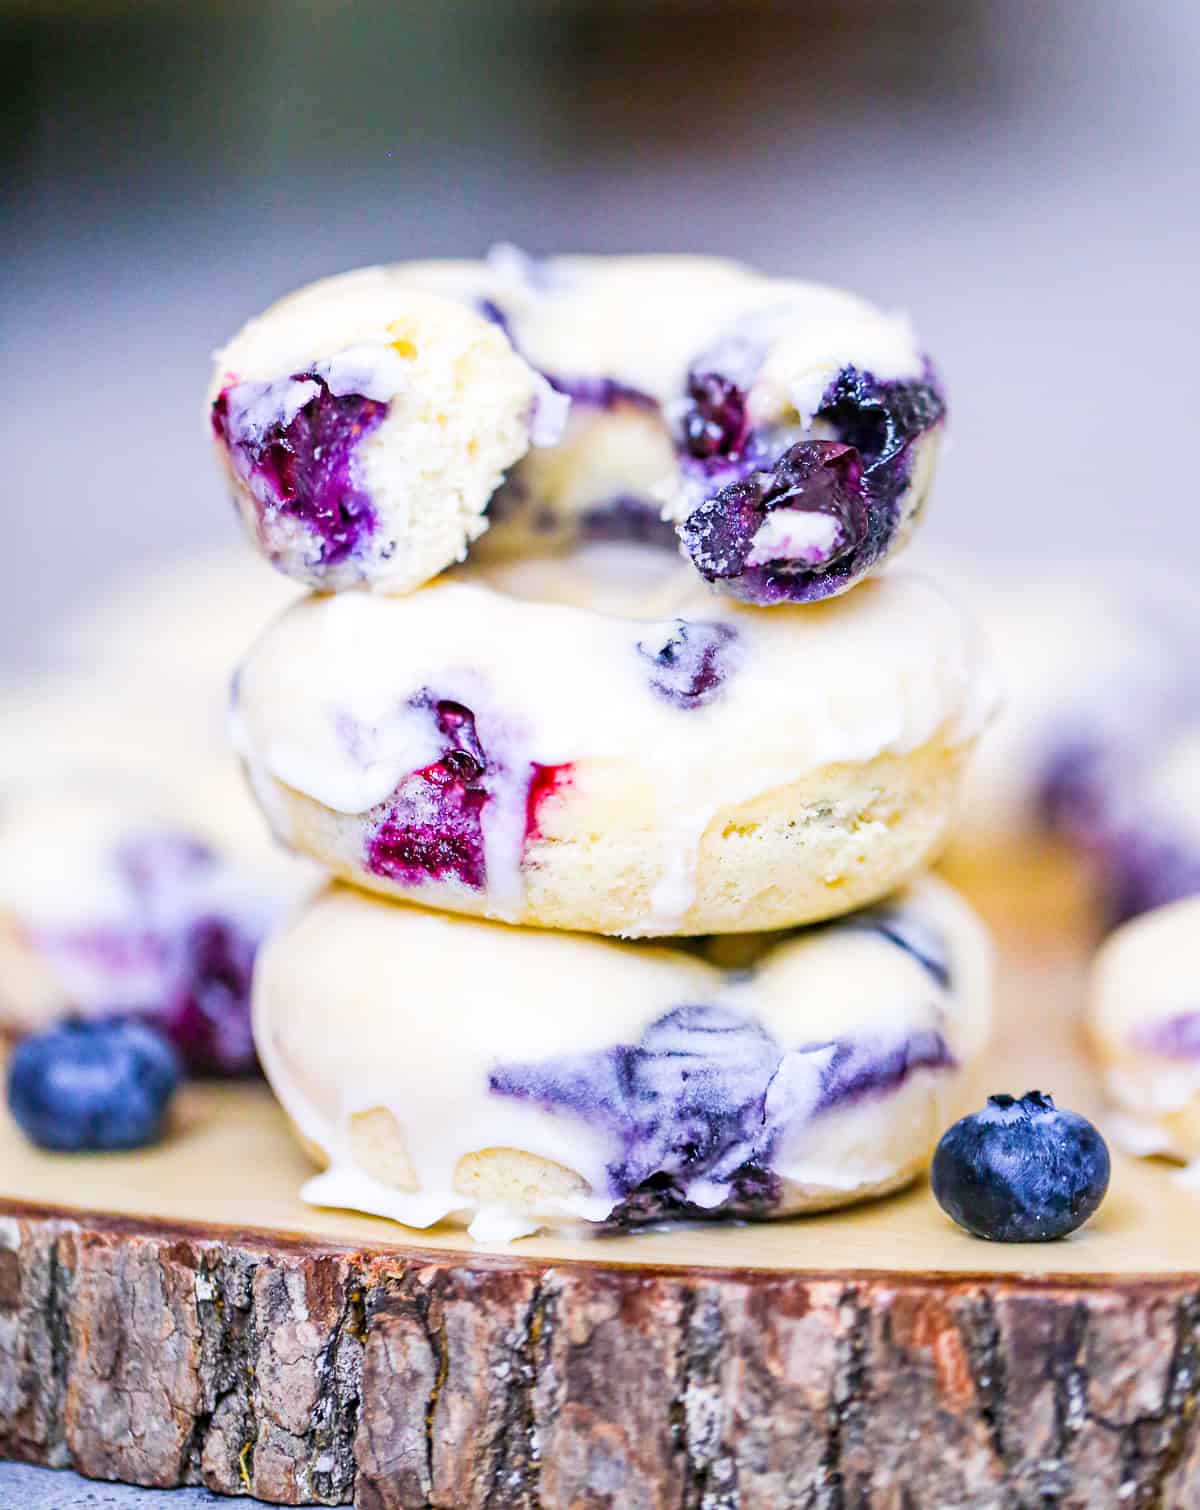 Delectable Glazed Blueberry Donuts